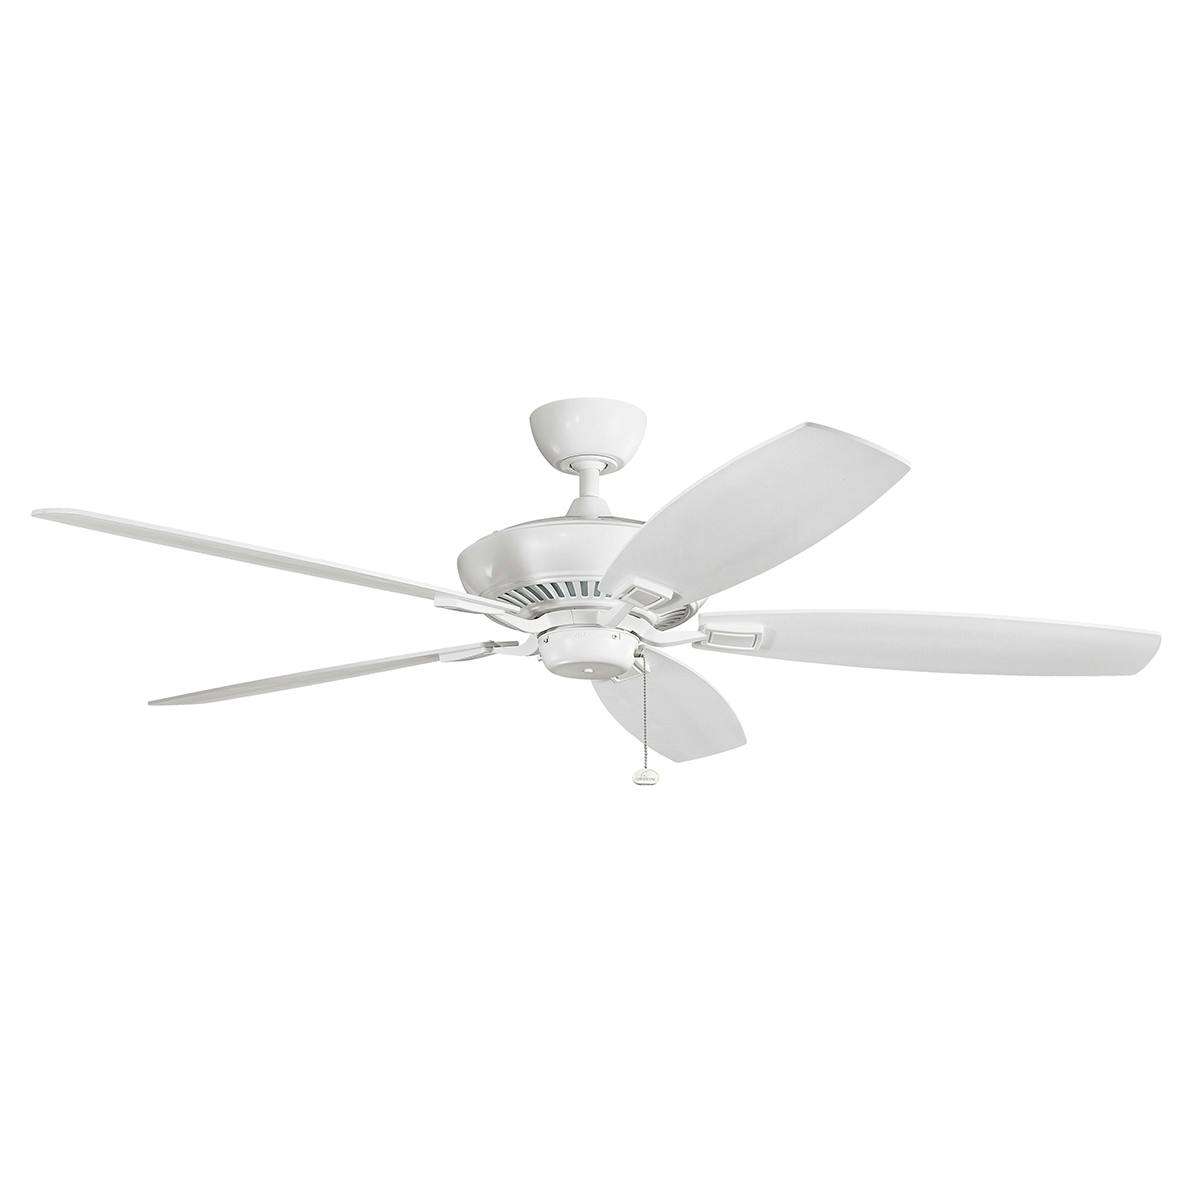 Canfield™ XL 60" Ceiling Fan White on a white background